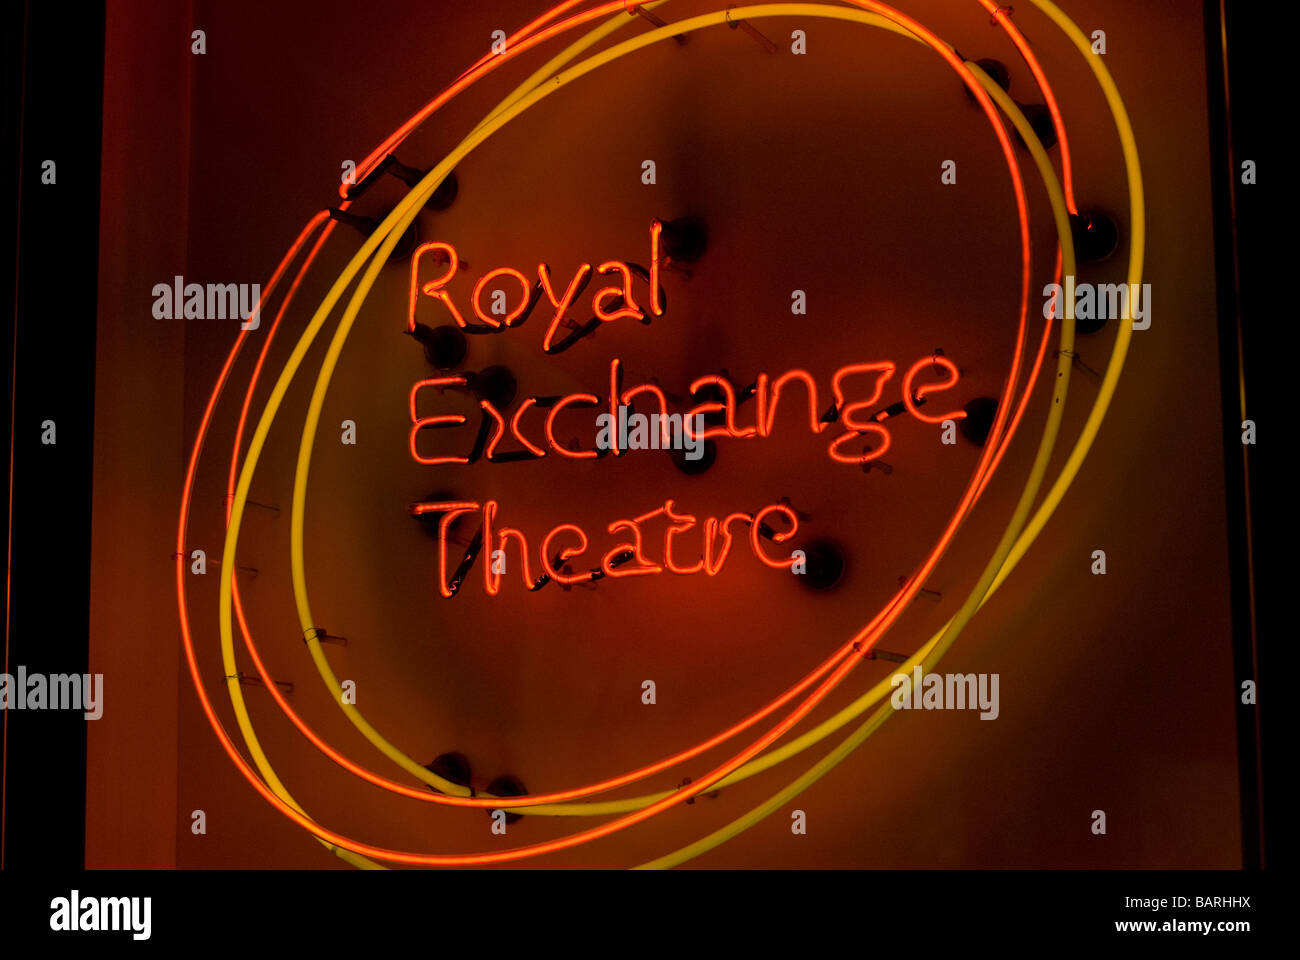 Royal Exchange Theatre neon sign at entrance Stock Photo